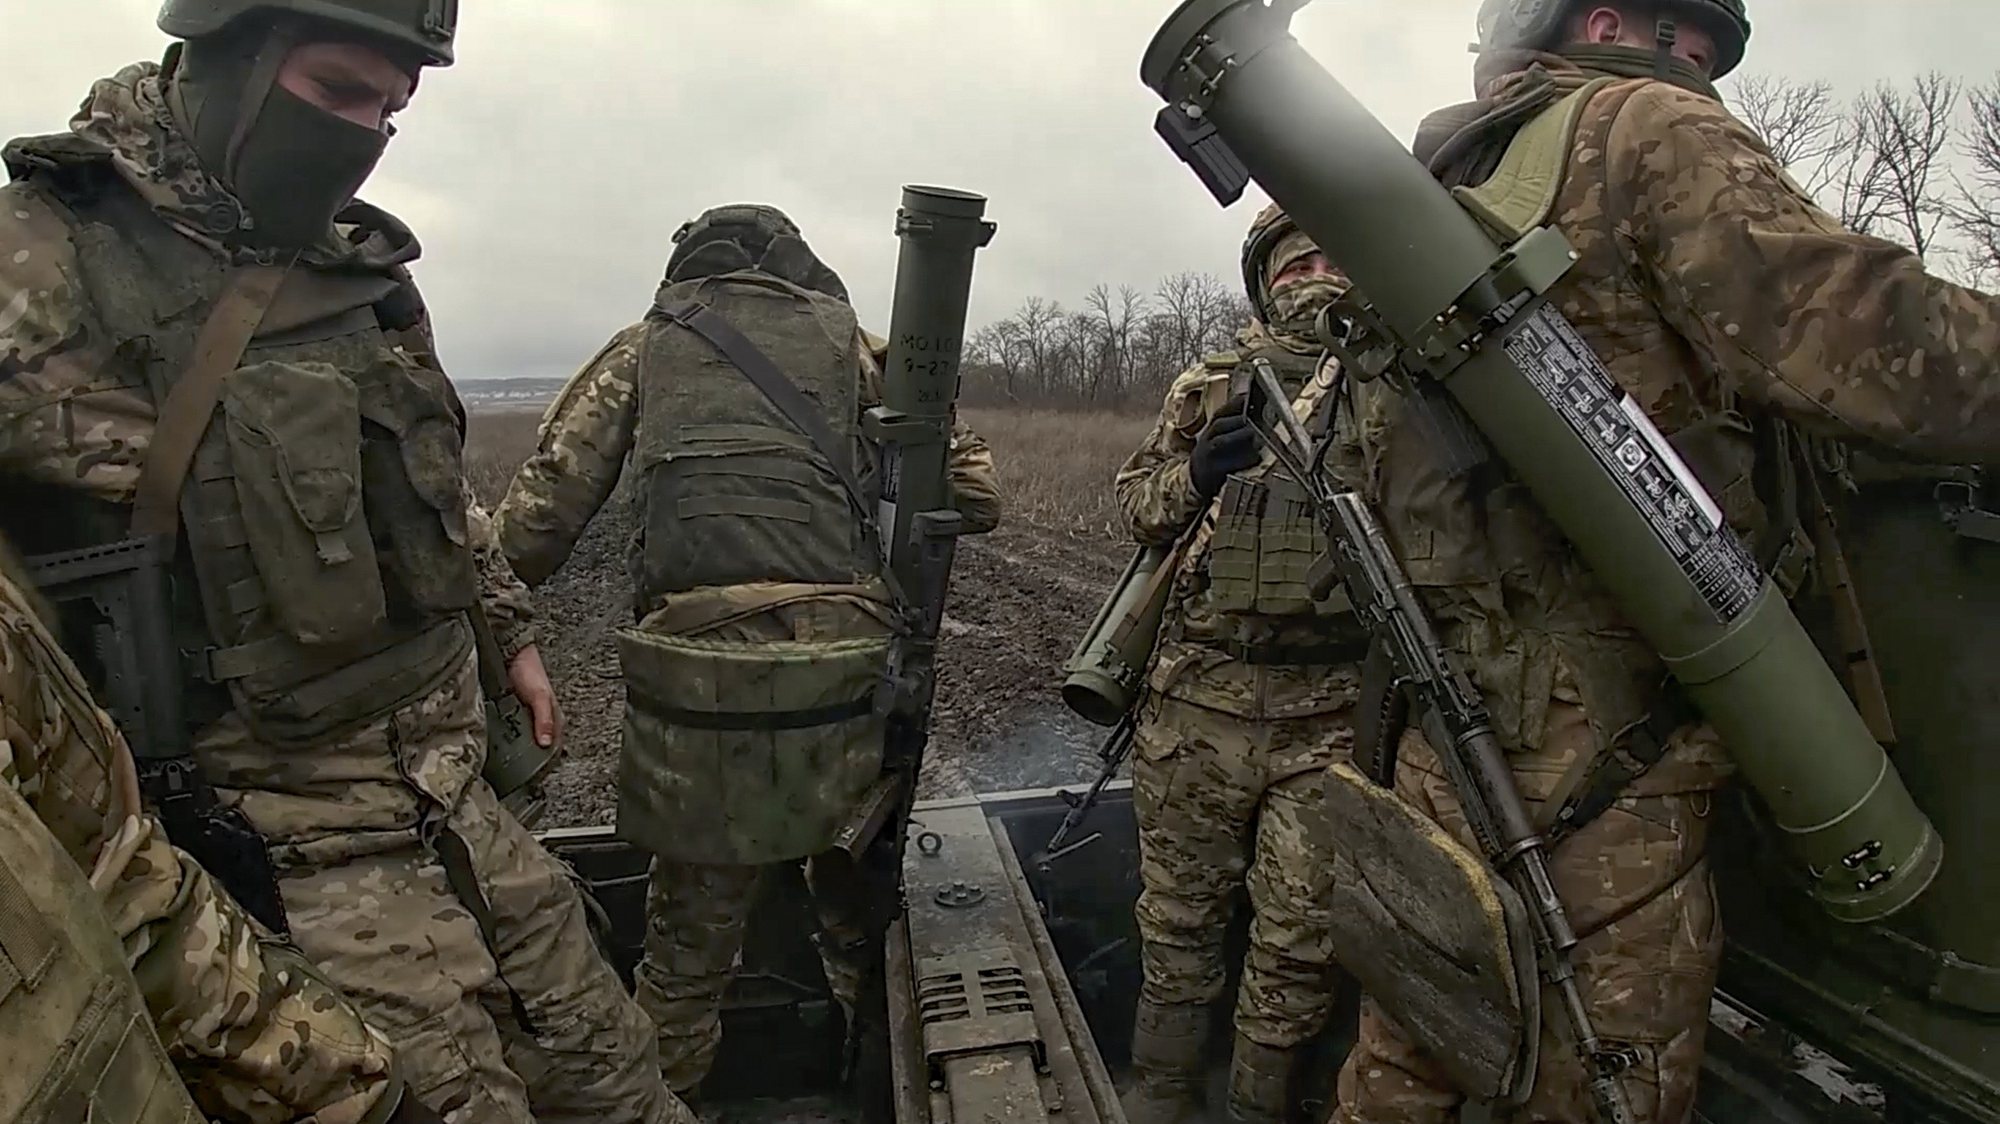 epa11269488 A still image taken from a handout video provided by the Russian Defence Ministry press-service, shows a Russian army crew of the ‘Fagot’ ATGM in combat against Ukrainian troops in Russian controlled part of Ukraine, Luhansk region, Ukraine, 10 April 2024. According to the Russian Defence Ministry, crews of 2S5 Giatsint-S self-propelled artillery units are conducting counter-battery combat, striking at Ukrainian army ammunition depots and other strongholds. Russian troops entered Ukrainian territory on 24 February 2022, starting a conflict that has provoked destruction and a humanitarian crisis.  EPA/RUSSIAN DEFENCE MINISTRY PRESS SERVICE/HANDOUT HANDOUT HANDOUT EDITORIAL USE ONLY/NO SALES HANDOUT EDITORIAL USE ONLY/NO SALES HANDOUT EDITORIAL USE ONLY/NO SALES